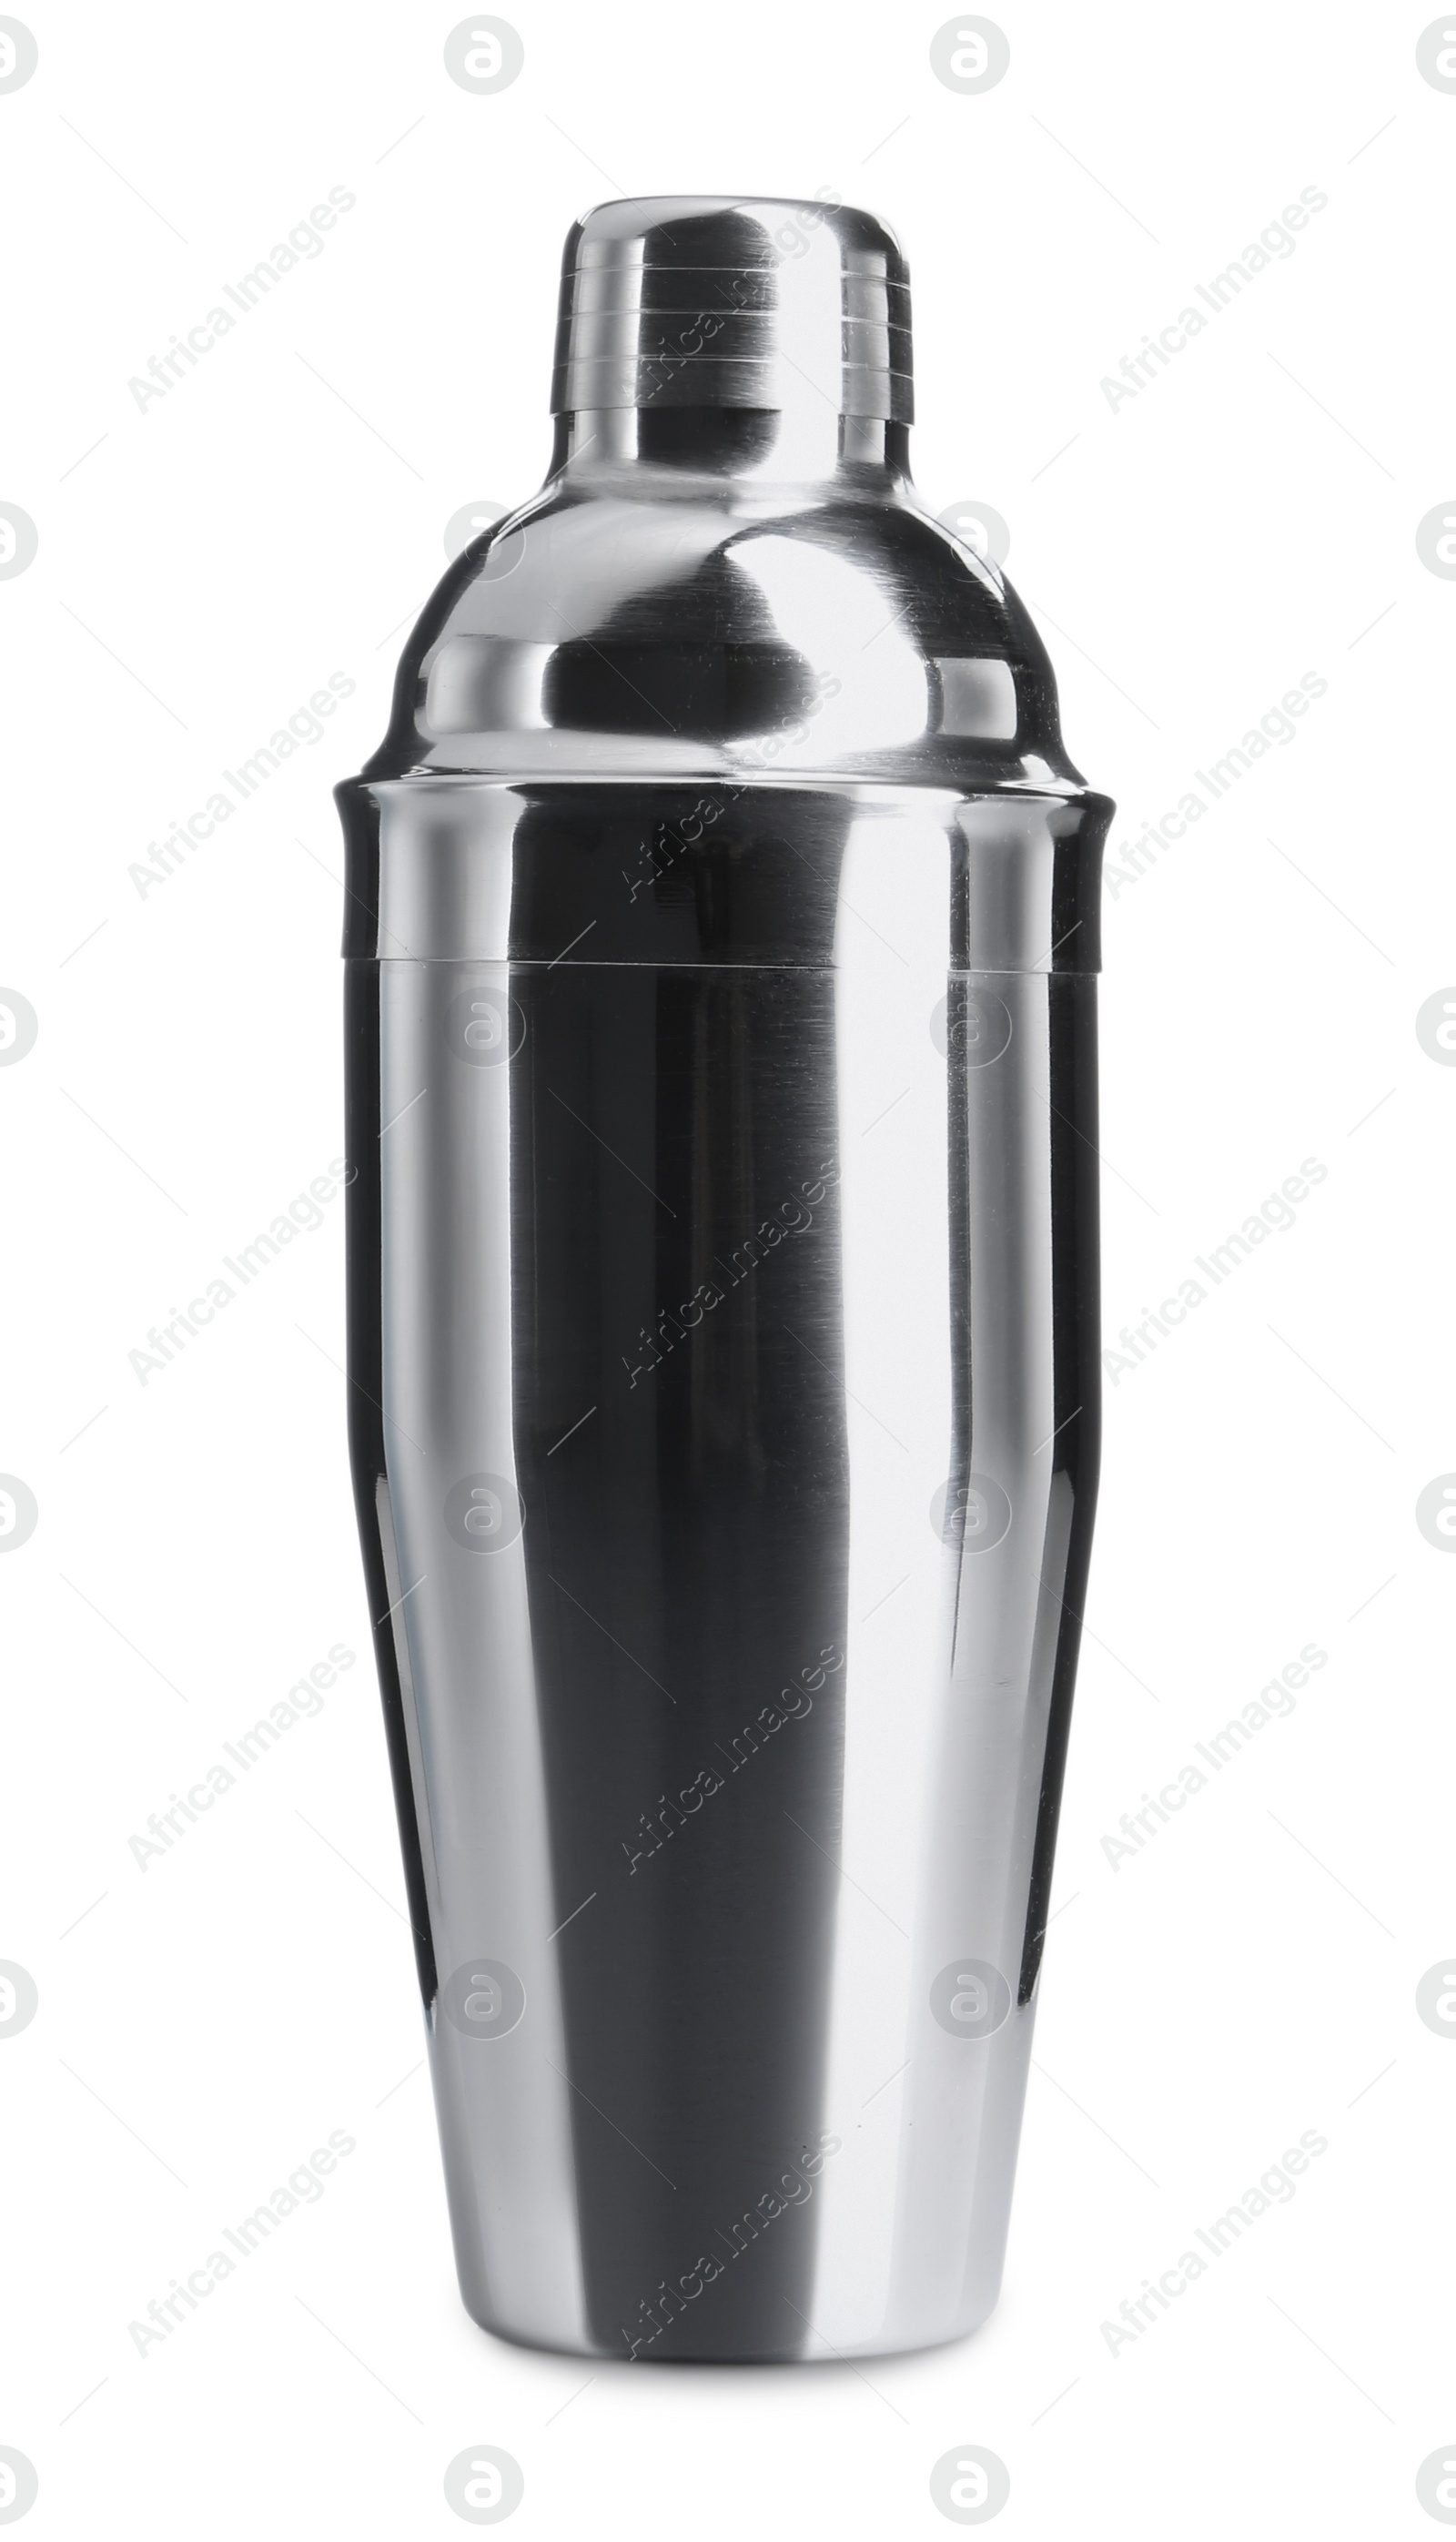 Photo of One metal cocktail shaker isolated on white